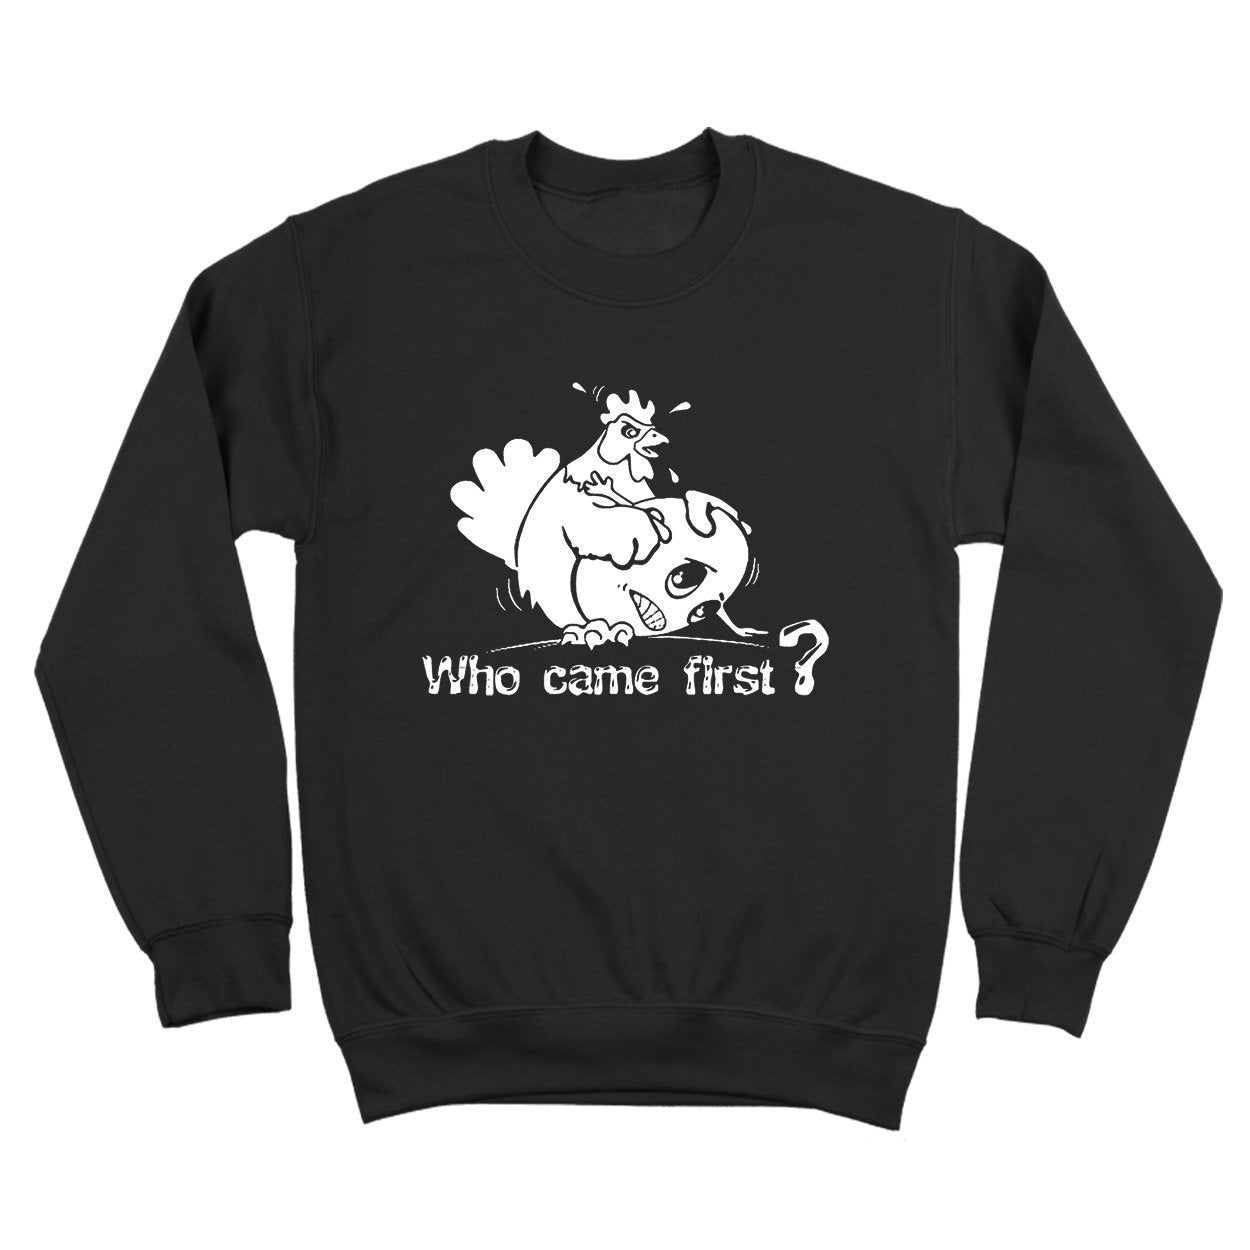 Chicken Or Egg - DonkeyTees